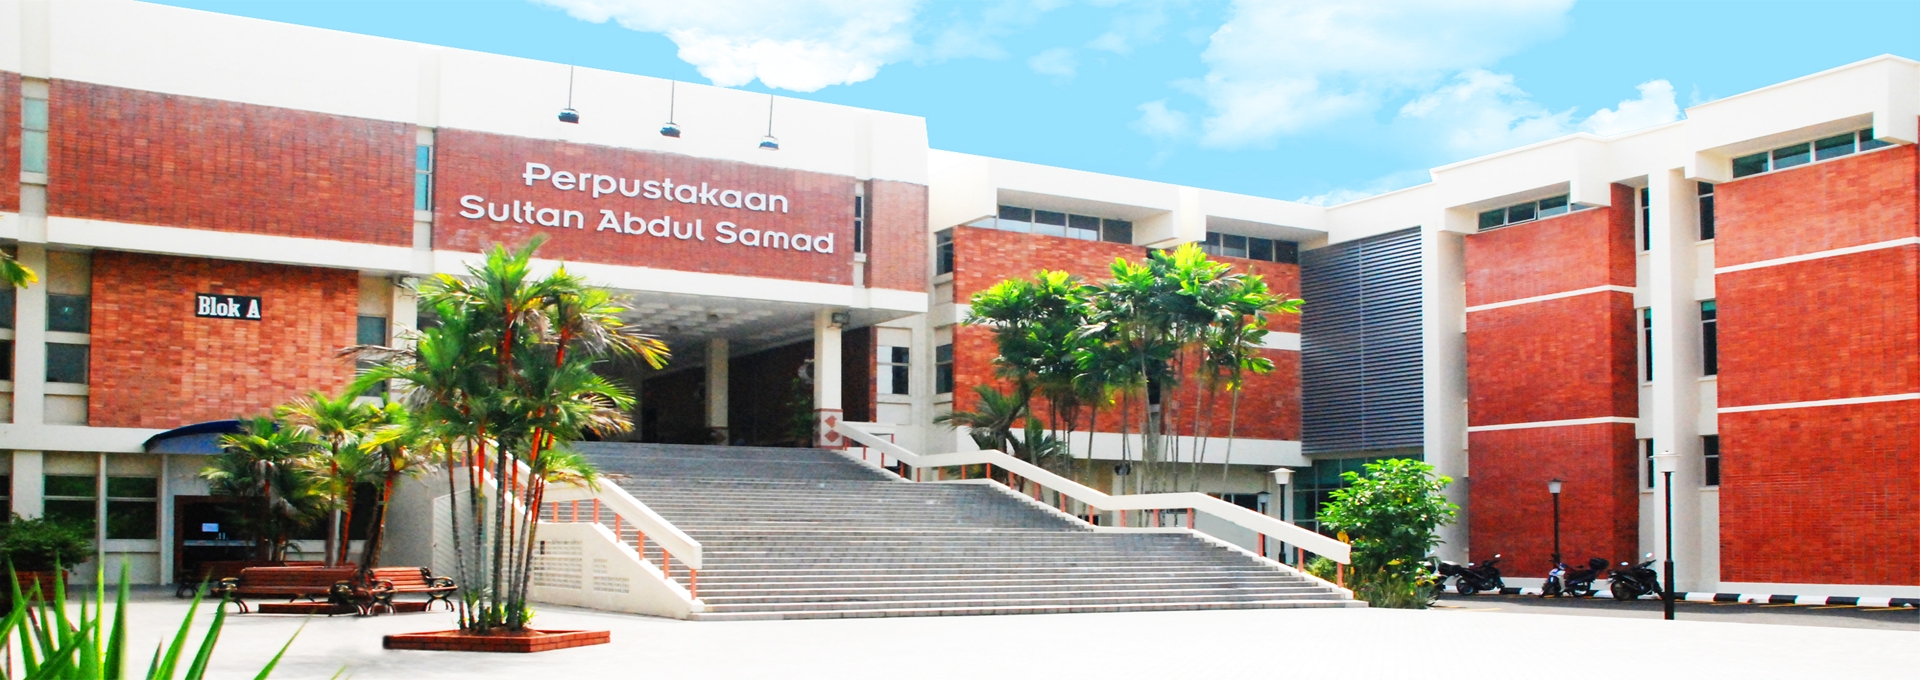 Welcome to Sultan Abdul Samad Library